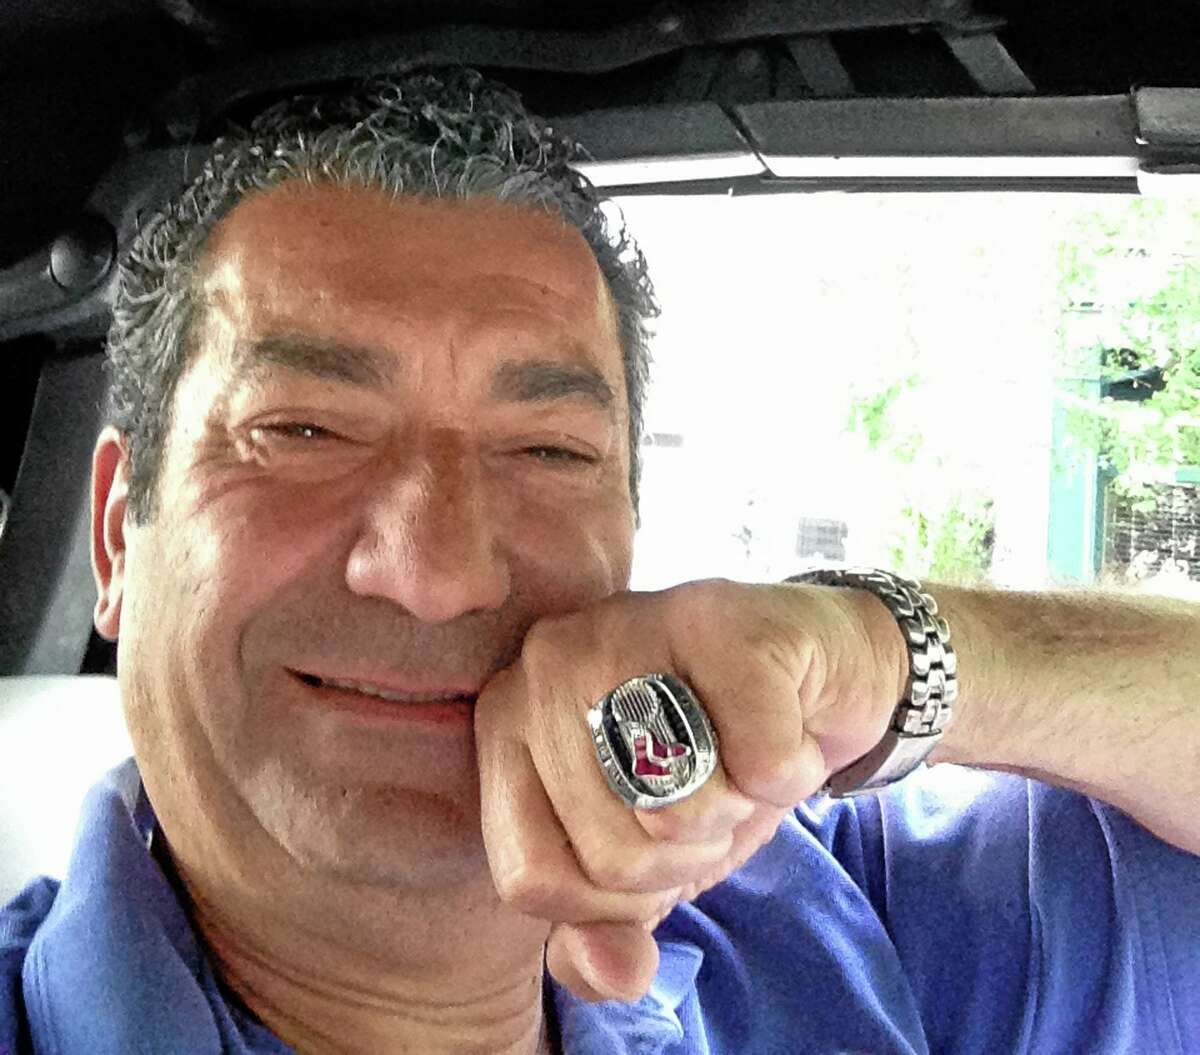 New York Yankees fan Militello displays the 2013 Red Sox World Series ring he found at his New York restaurant on Thursday night. Militello returned the ring on Friday to Drew Weber, who owns one of Boston’s minor league teams.